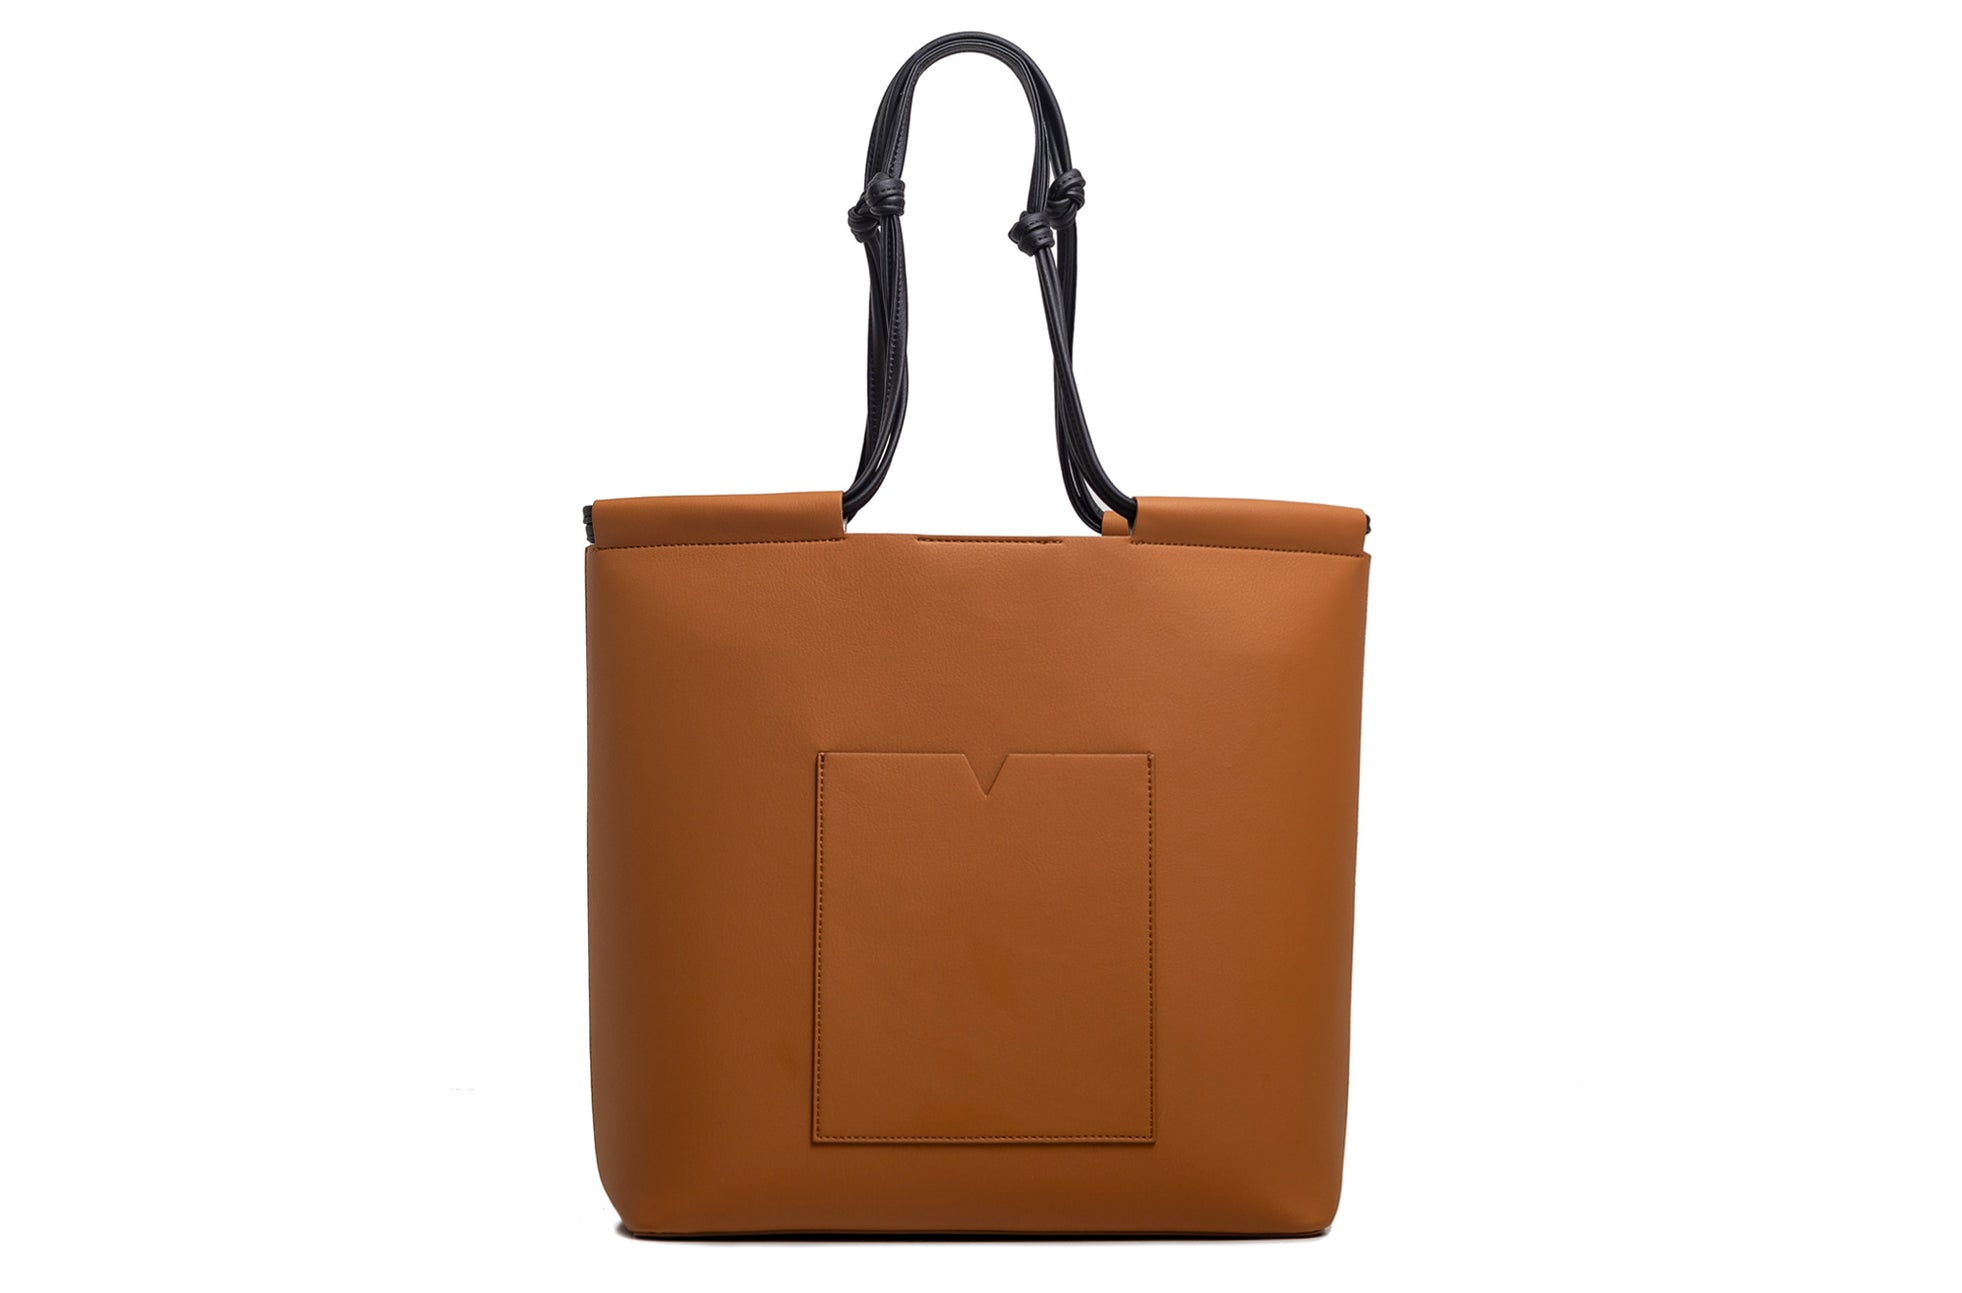 The Market Tote in Technik-Leather in Caramel and Black image 1